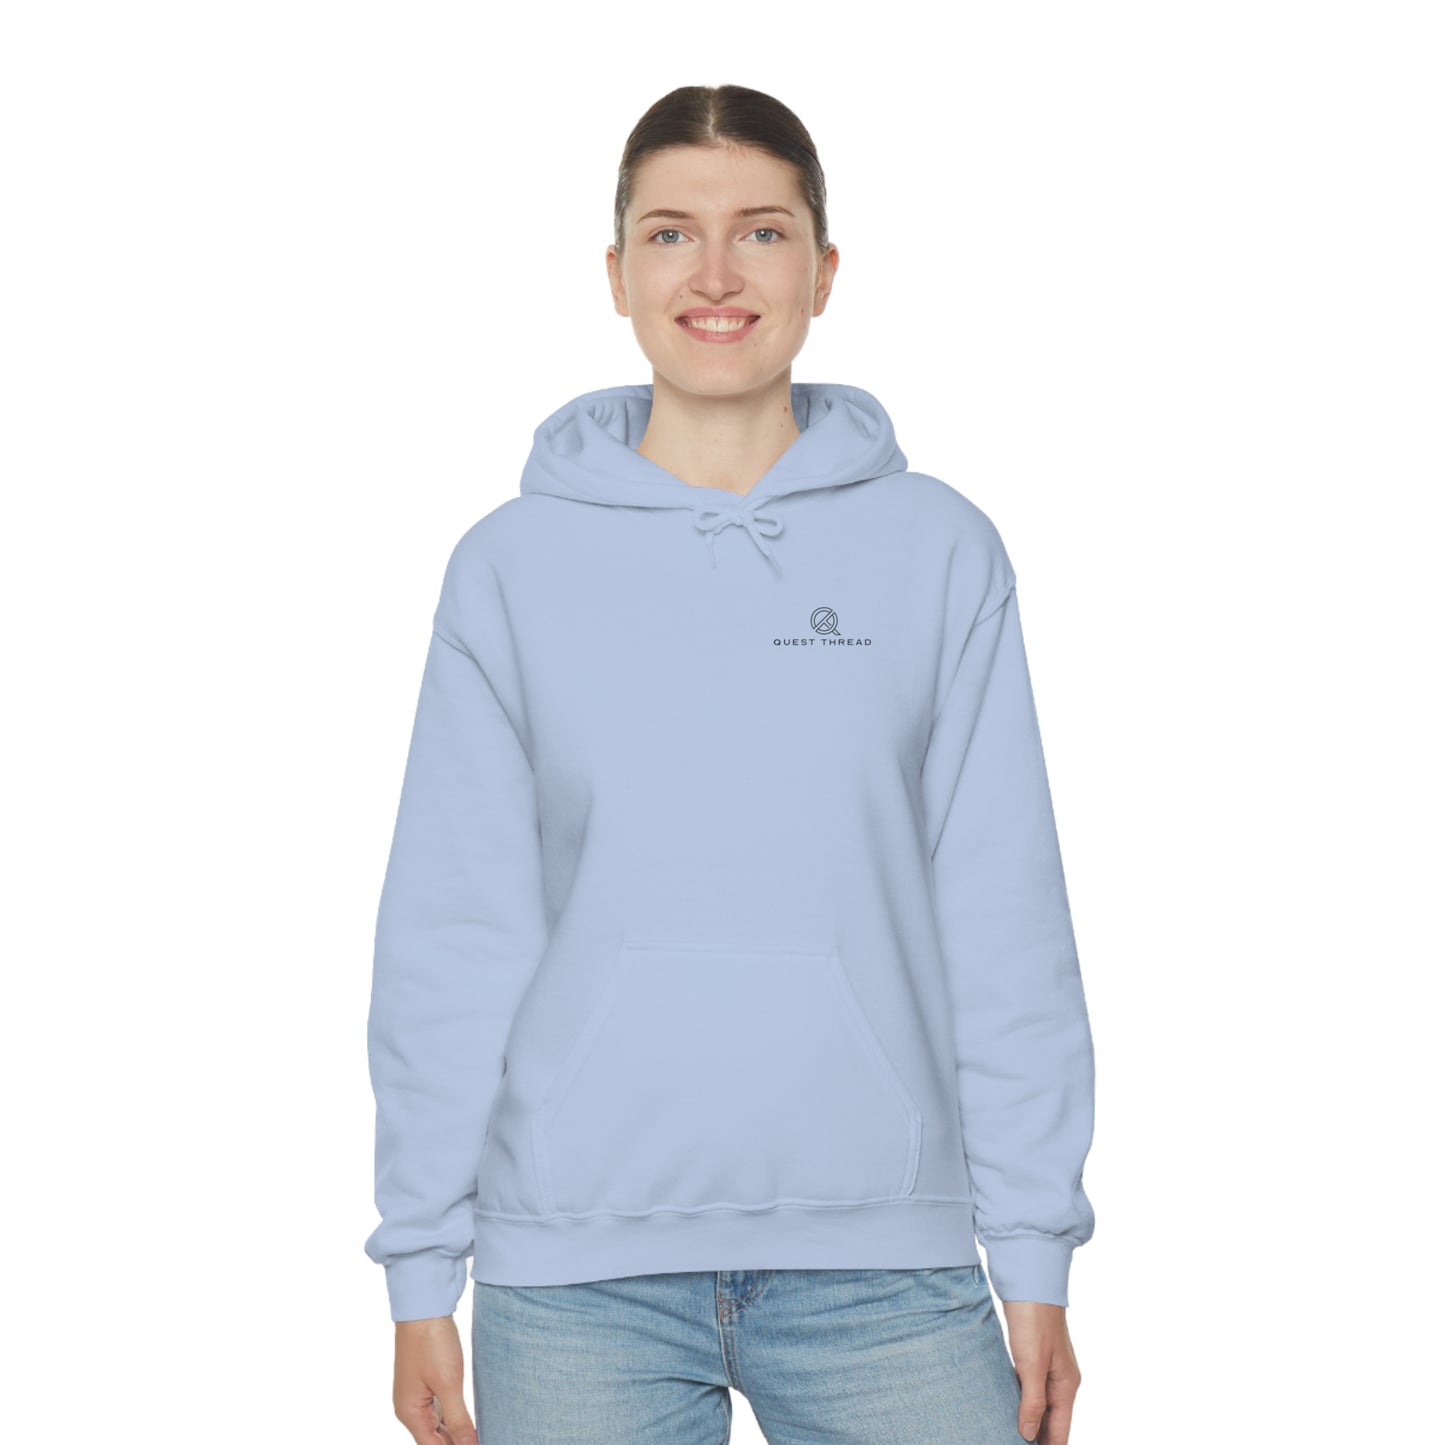 light-blue-quest-thread-hoodie-with-small-logo-on-left-chest